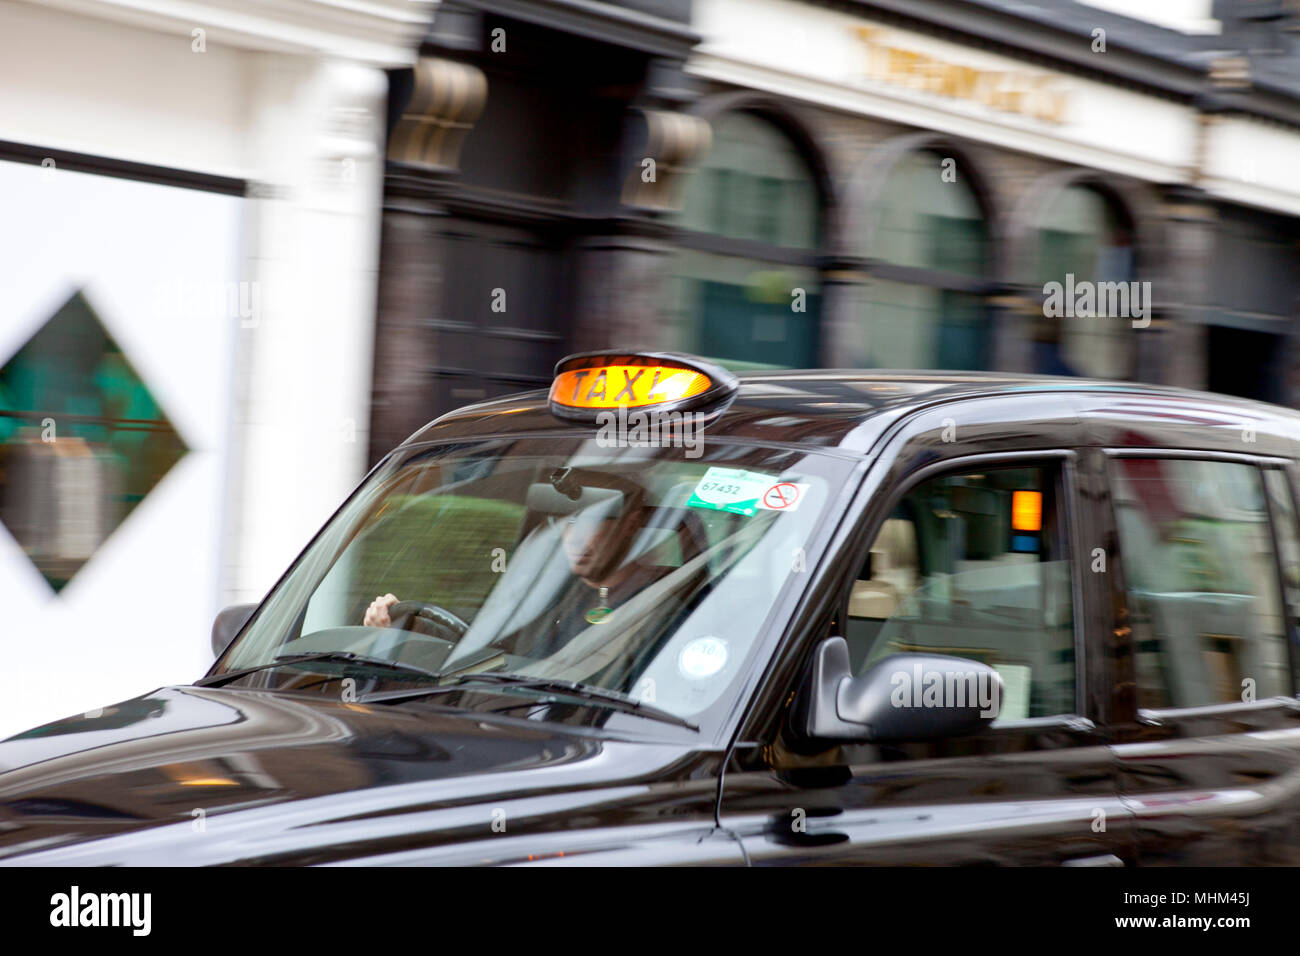 London taxi cab speeding through London with for hire light on Stock Photo